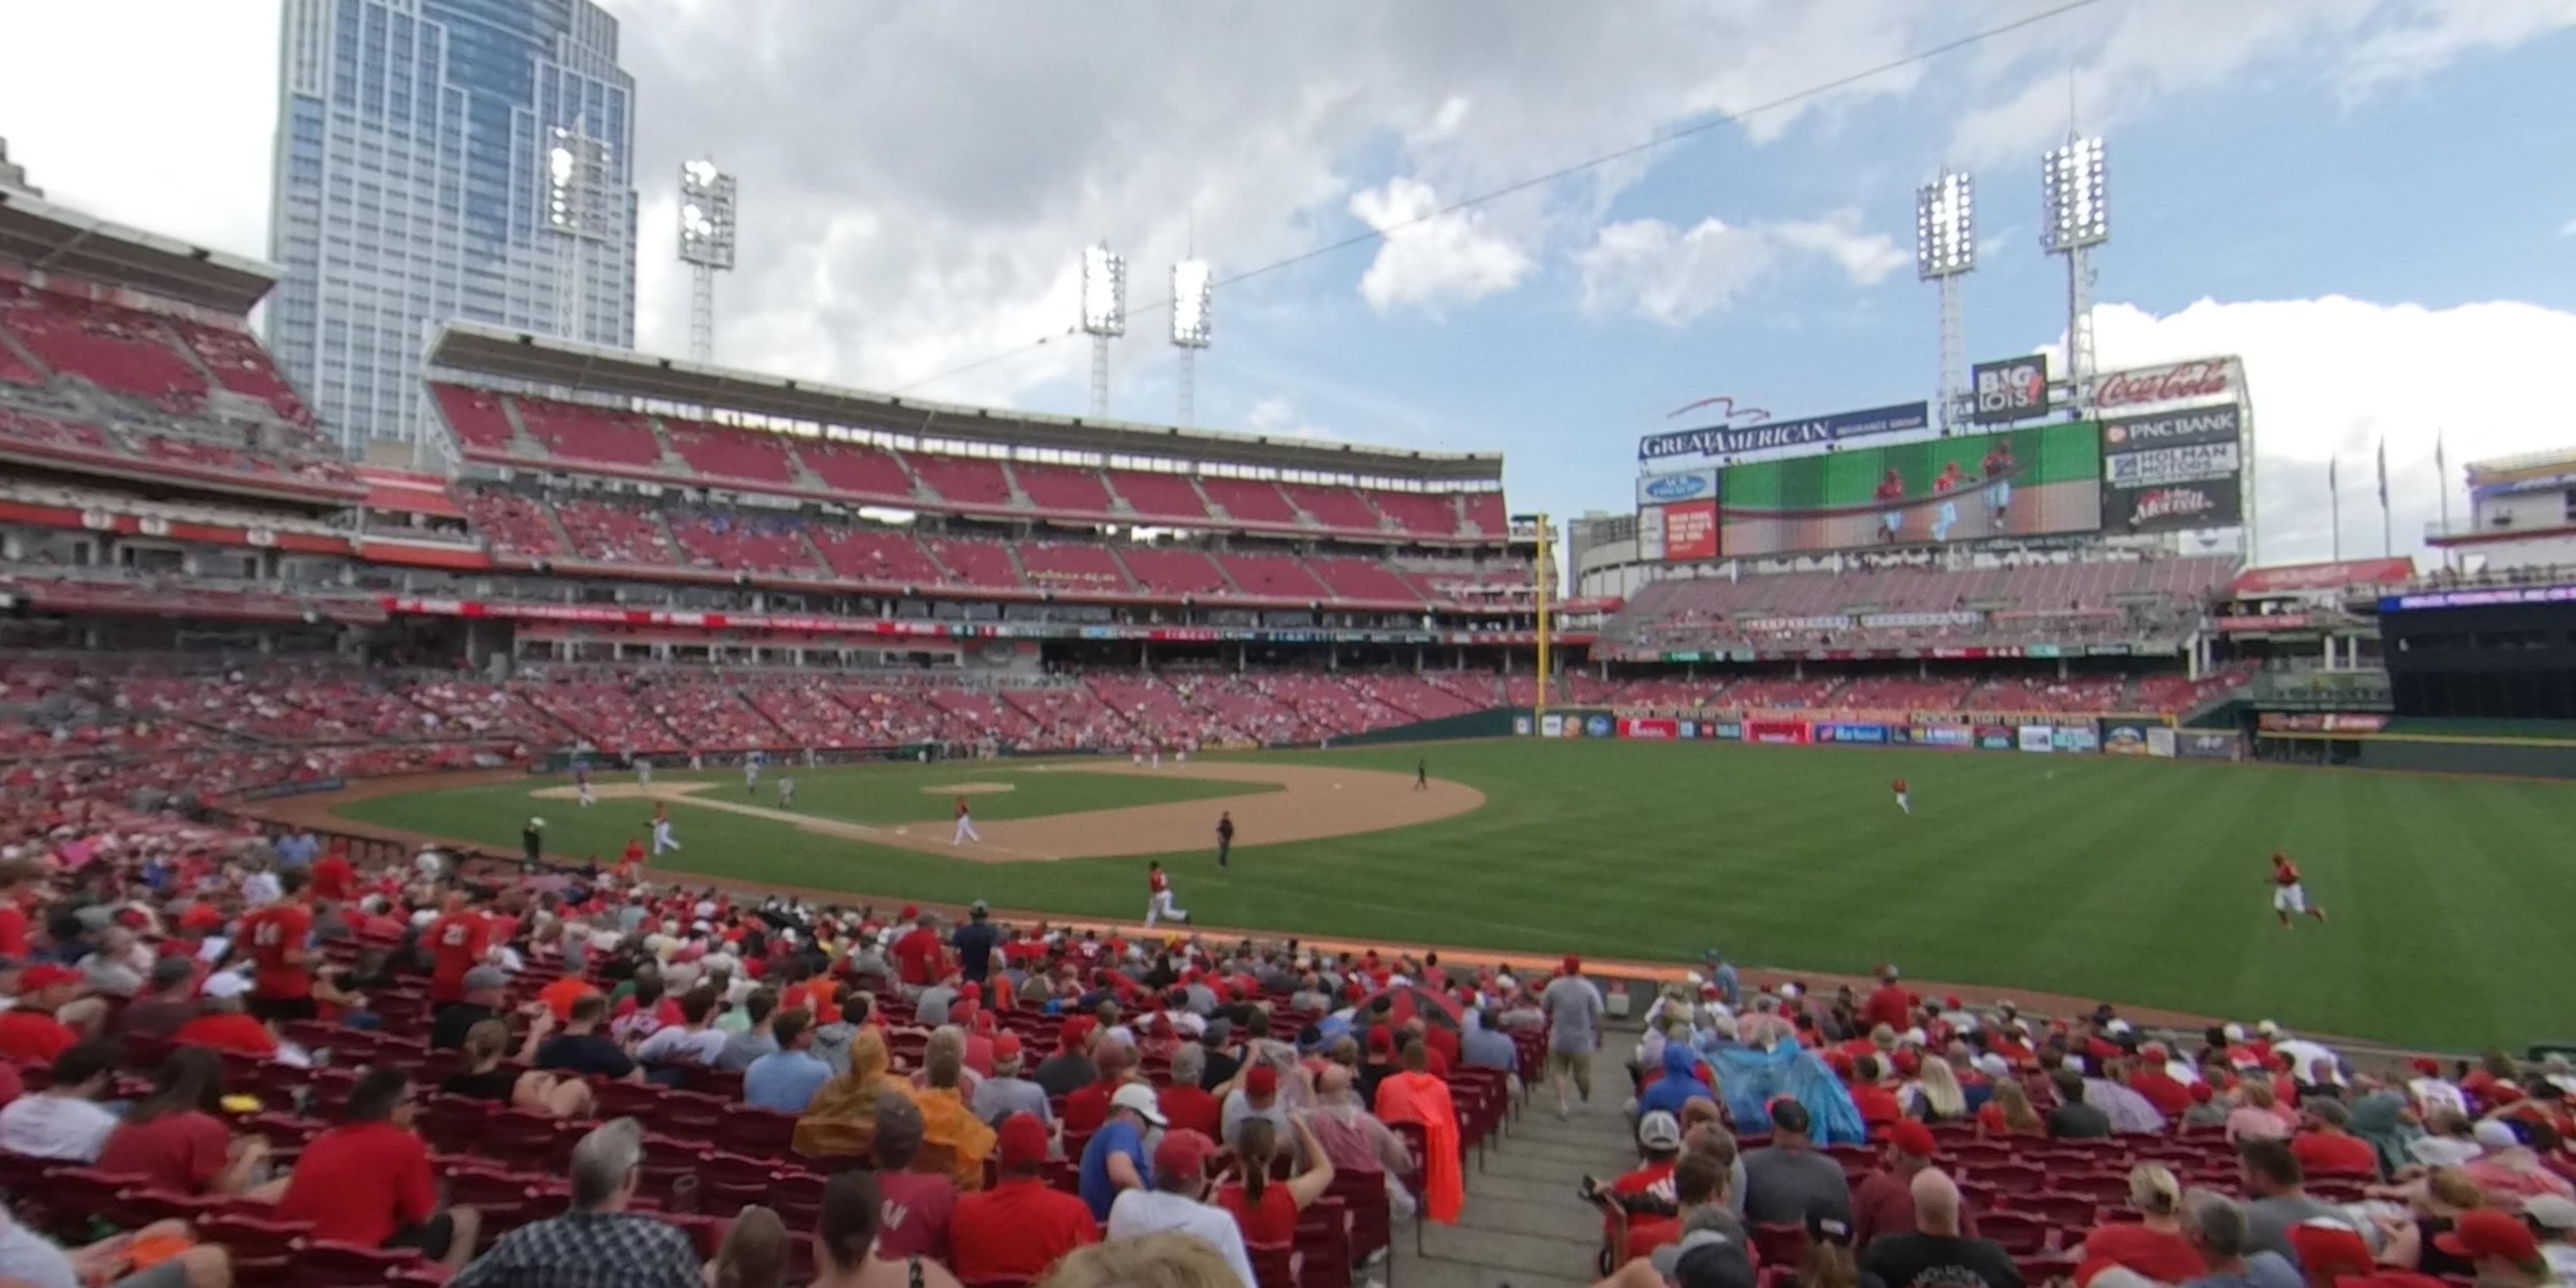 section 134 panoramic seat view  for baseball - great american ball park